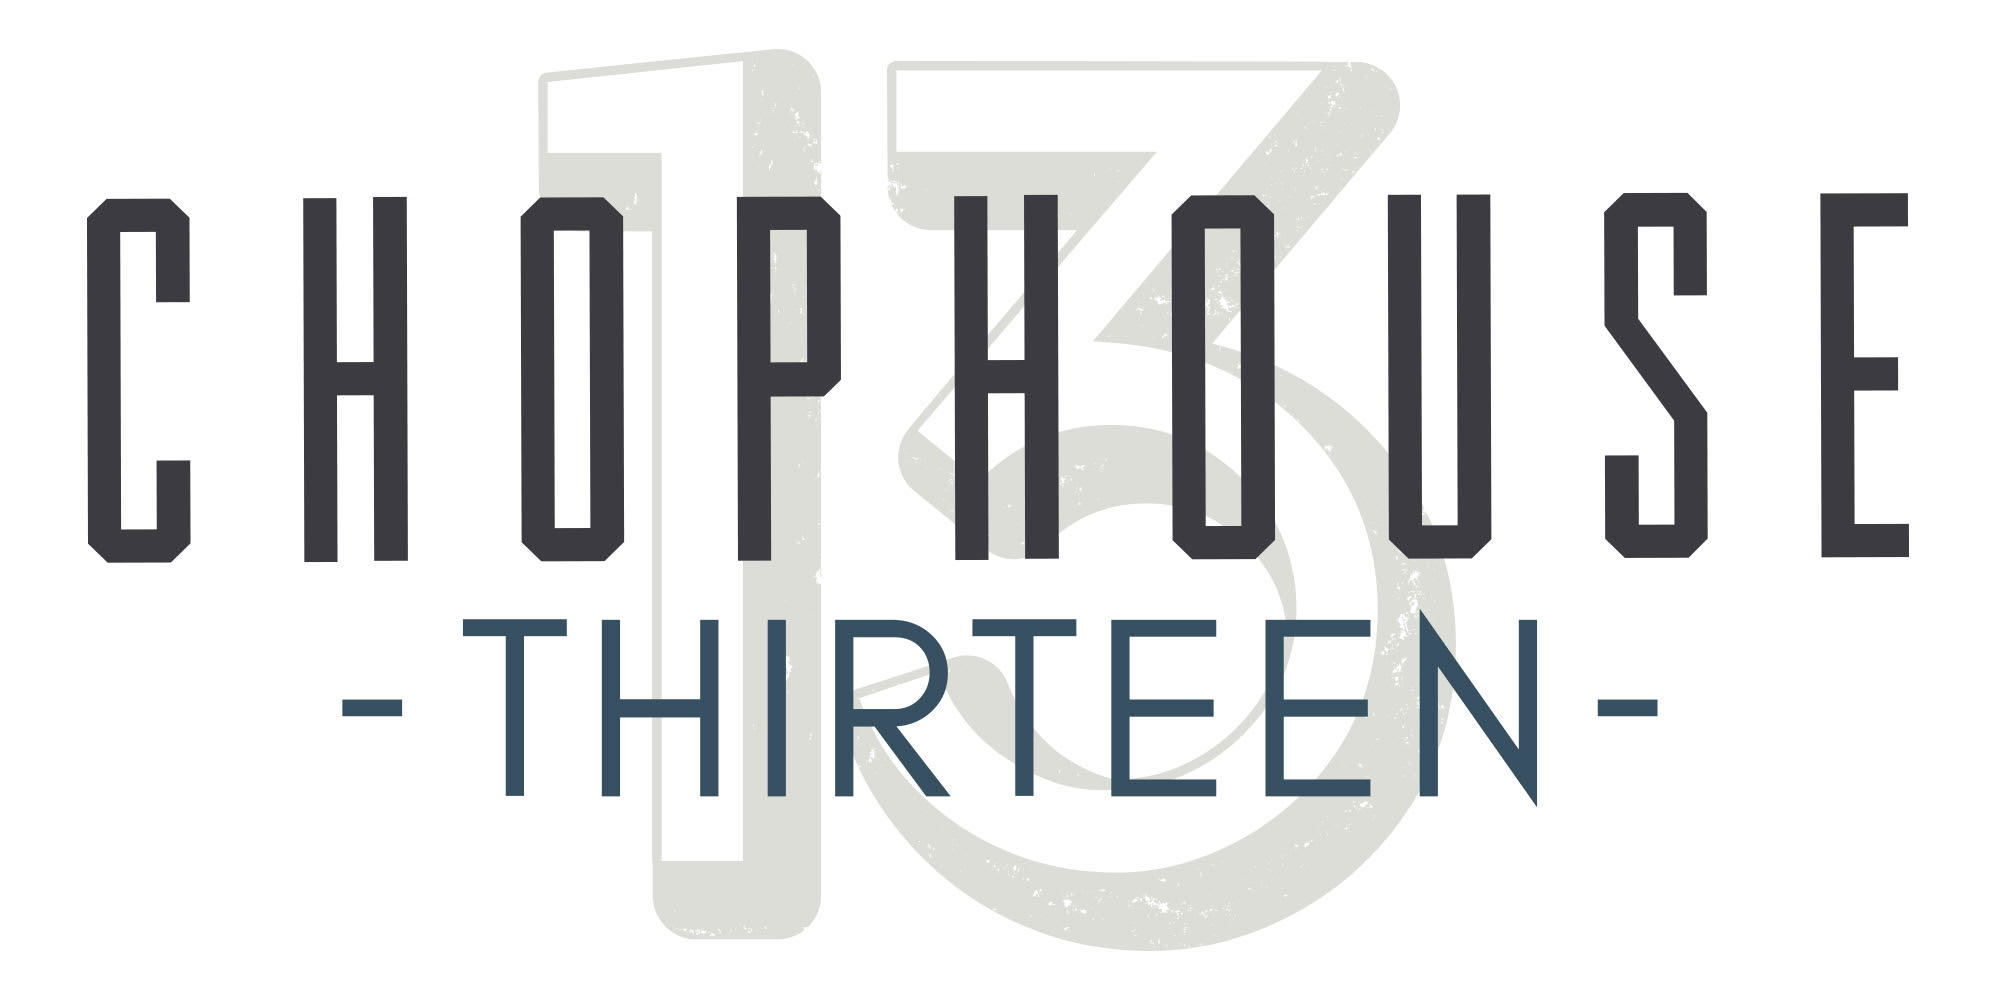 The new logo of the Chophouse 13.